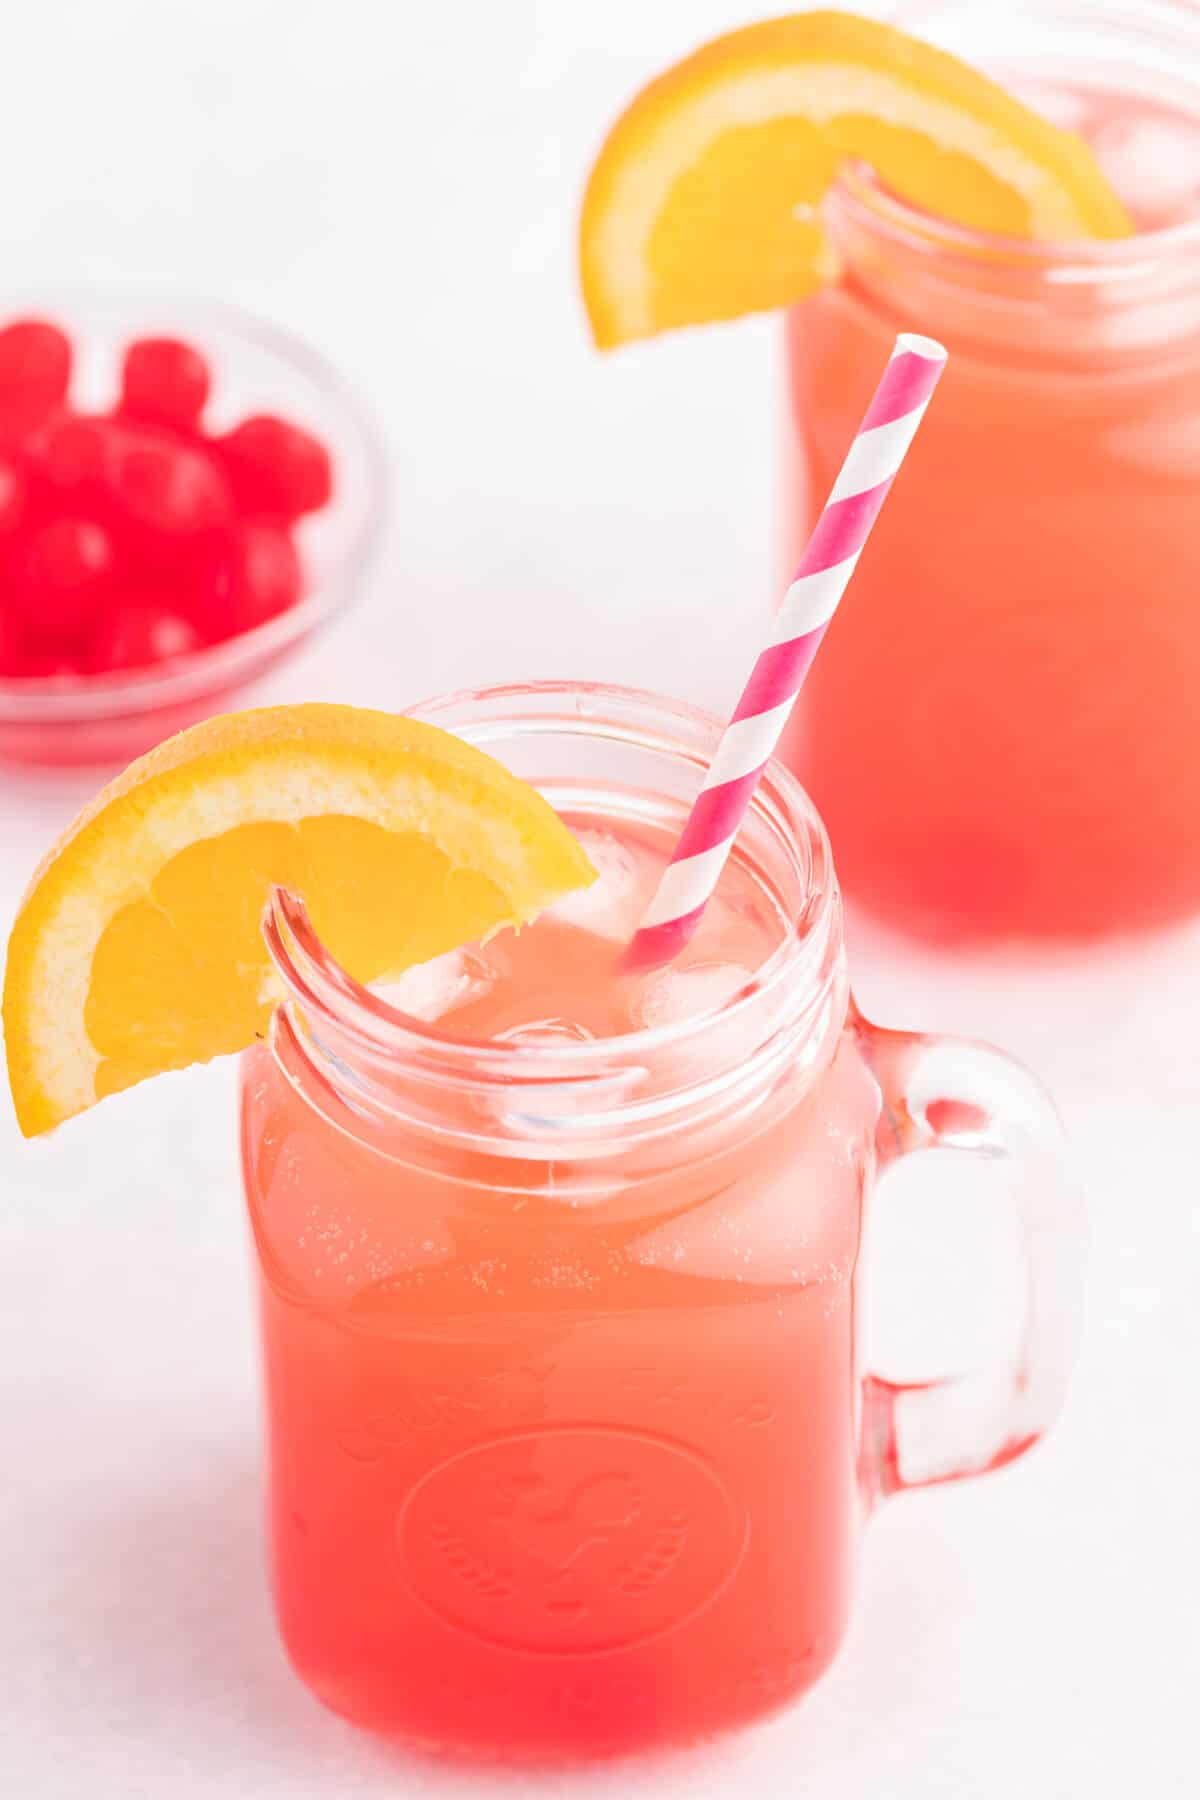 Shirley Temple drink in a glass with a straw and an orange slice.